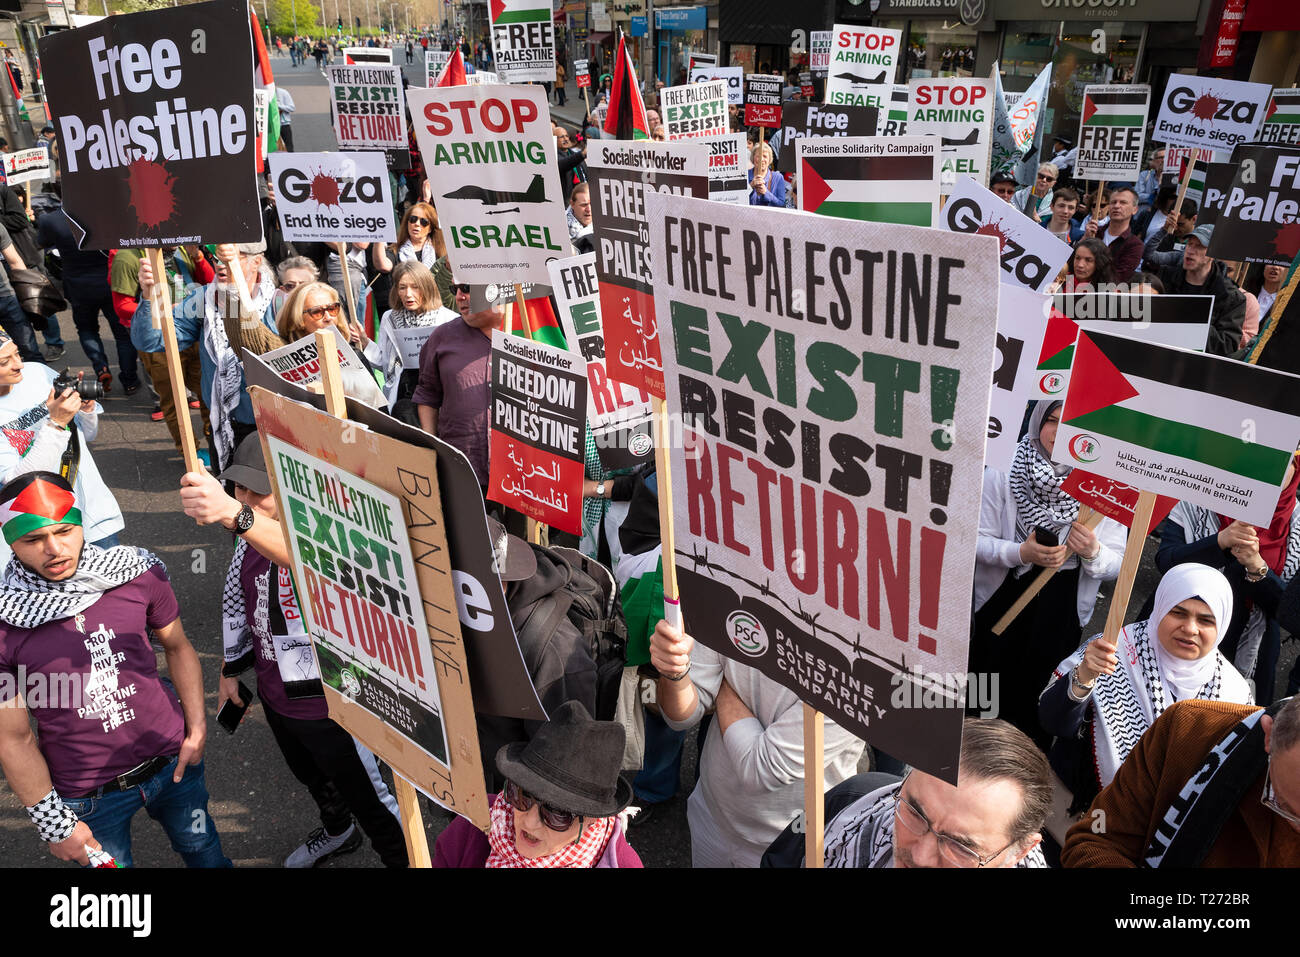 London, UK. 30th March 2019. Rally for Palestine, Exist, Resist and Return. Held outside the Israeli Embassy on Palestinian Land Day. Demanding freedom, justice and equality for the Palestinian people. March 30th also marks the the 1st anniversary of the start of the Great Return March. Organised by: Palestine Solidarity Campaign, Stop the War Coalition, Palestinian Forum in Britain, Friends of Al- Aqsa and Muslim Association of Britain. Credit: Stephen Bell/Alamy Live News. Stock Photo